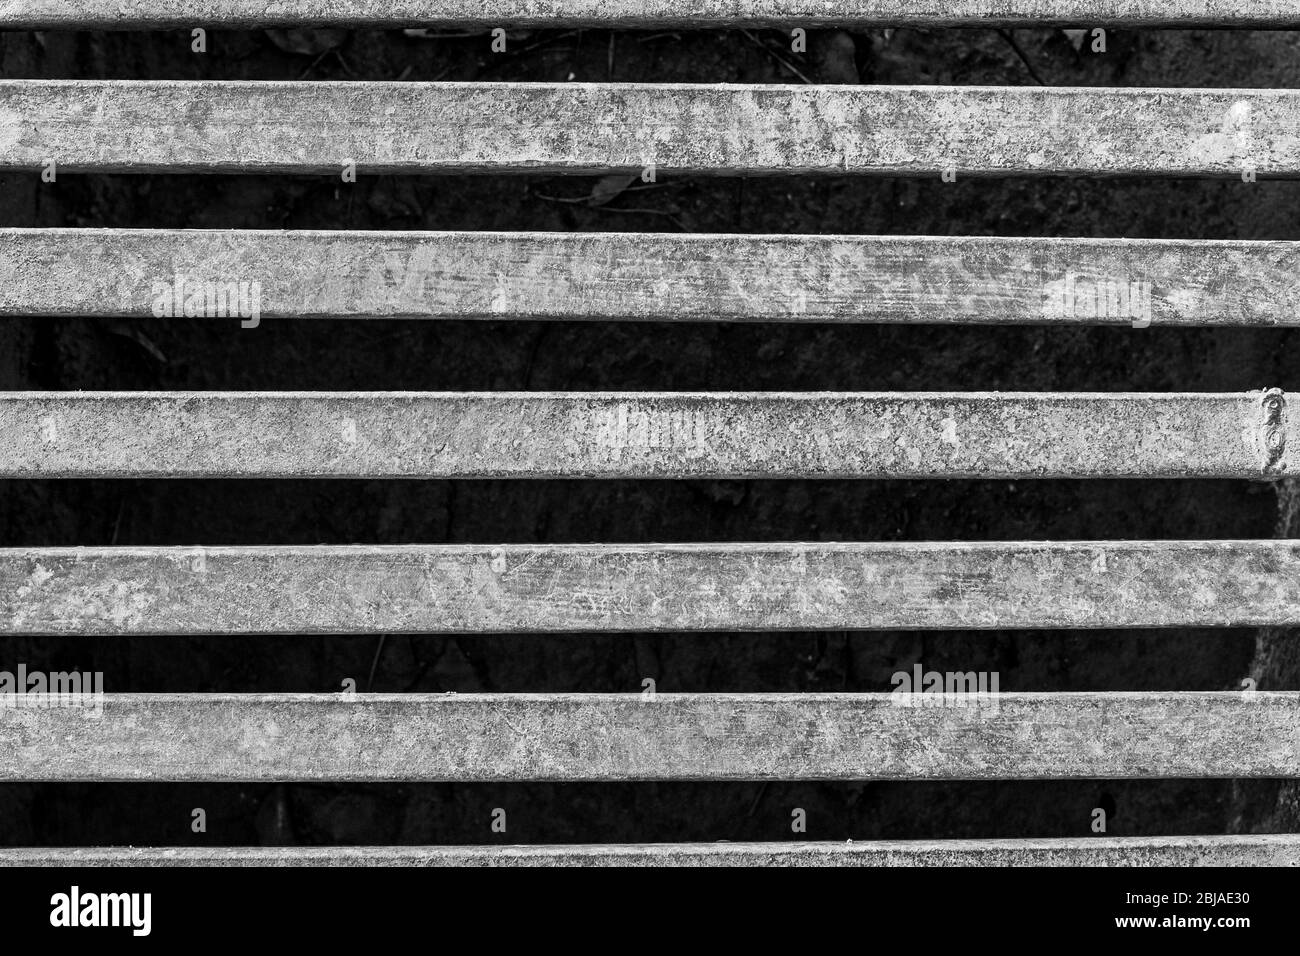 Black and white photo of an iron grate over a drainage channel on the road. Rusty texture on metal. Horizontal. Stock Photo